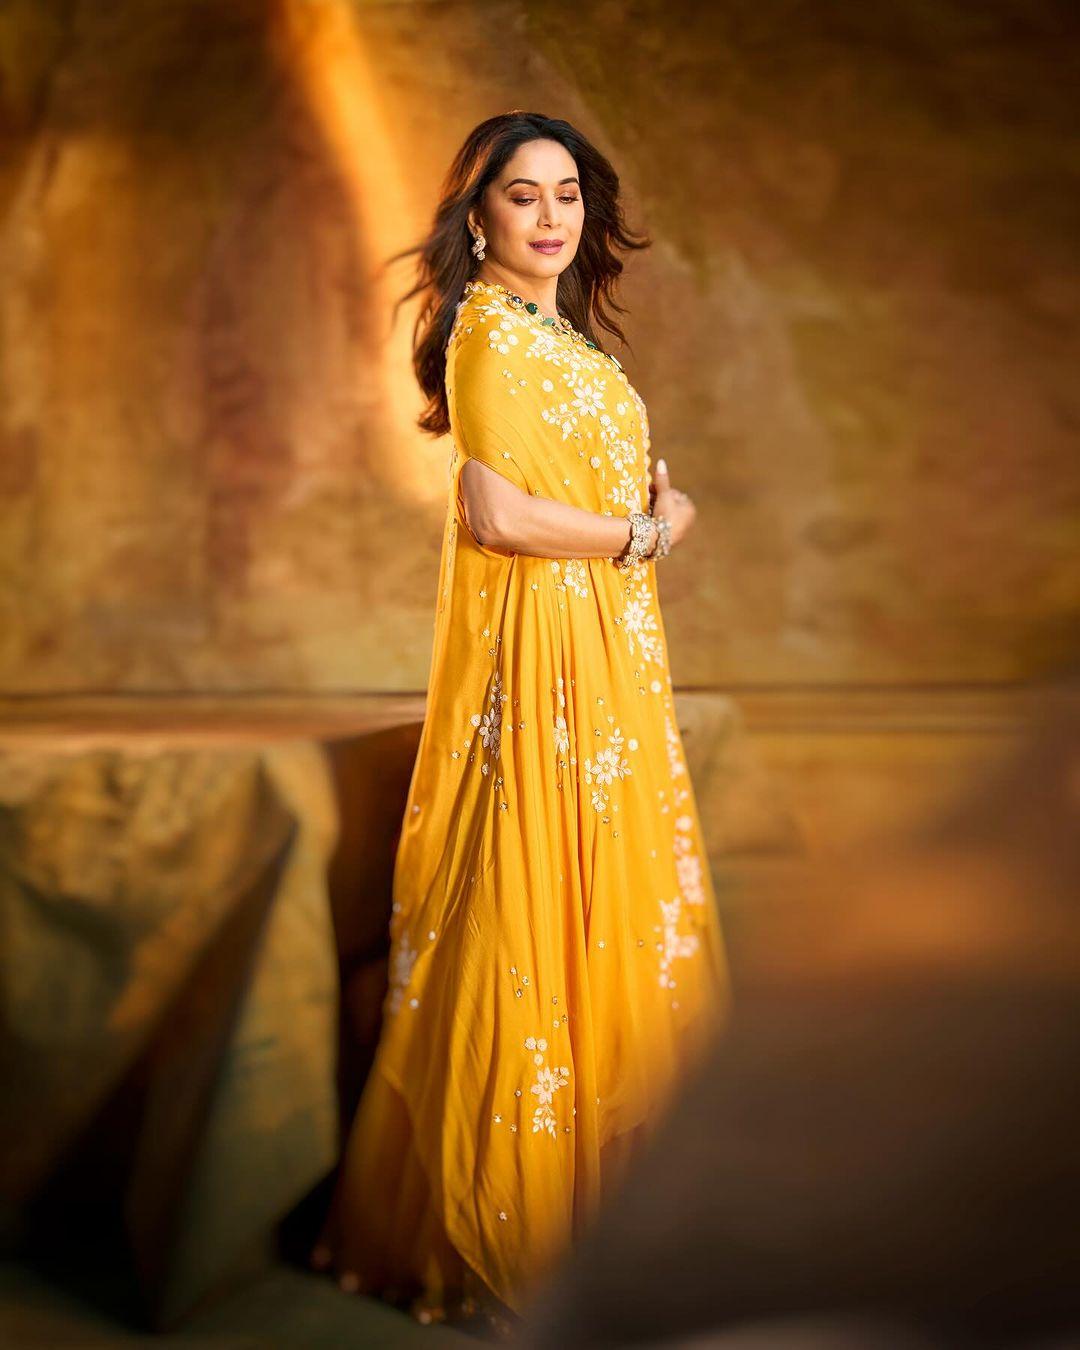 On the third day of Chaitra Navratri, think about embracing a stunning yellow lehenga akin to the one Madhuri Dixit elegantly wore.